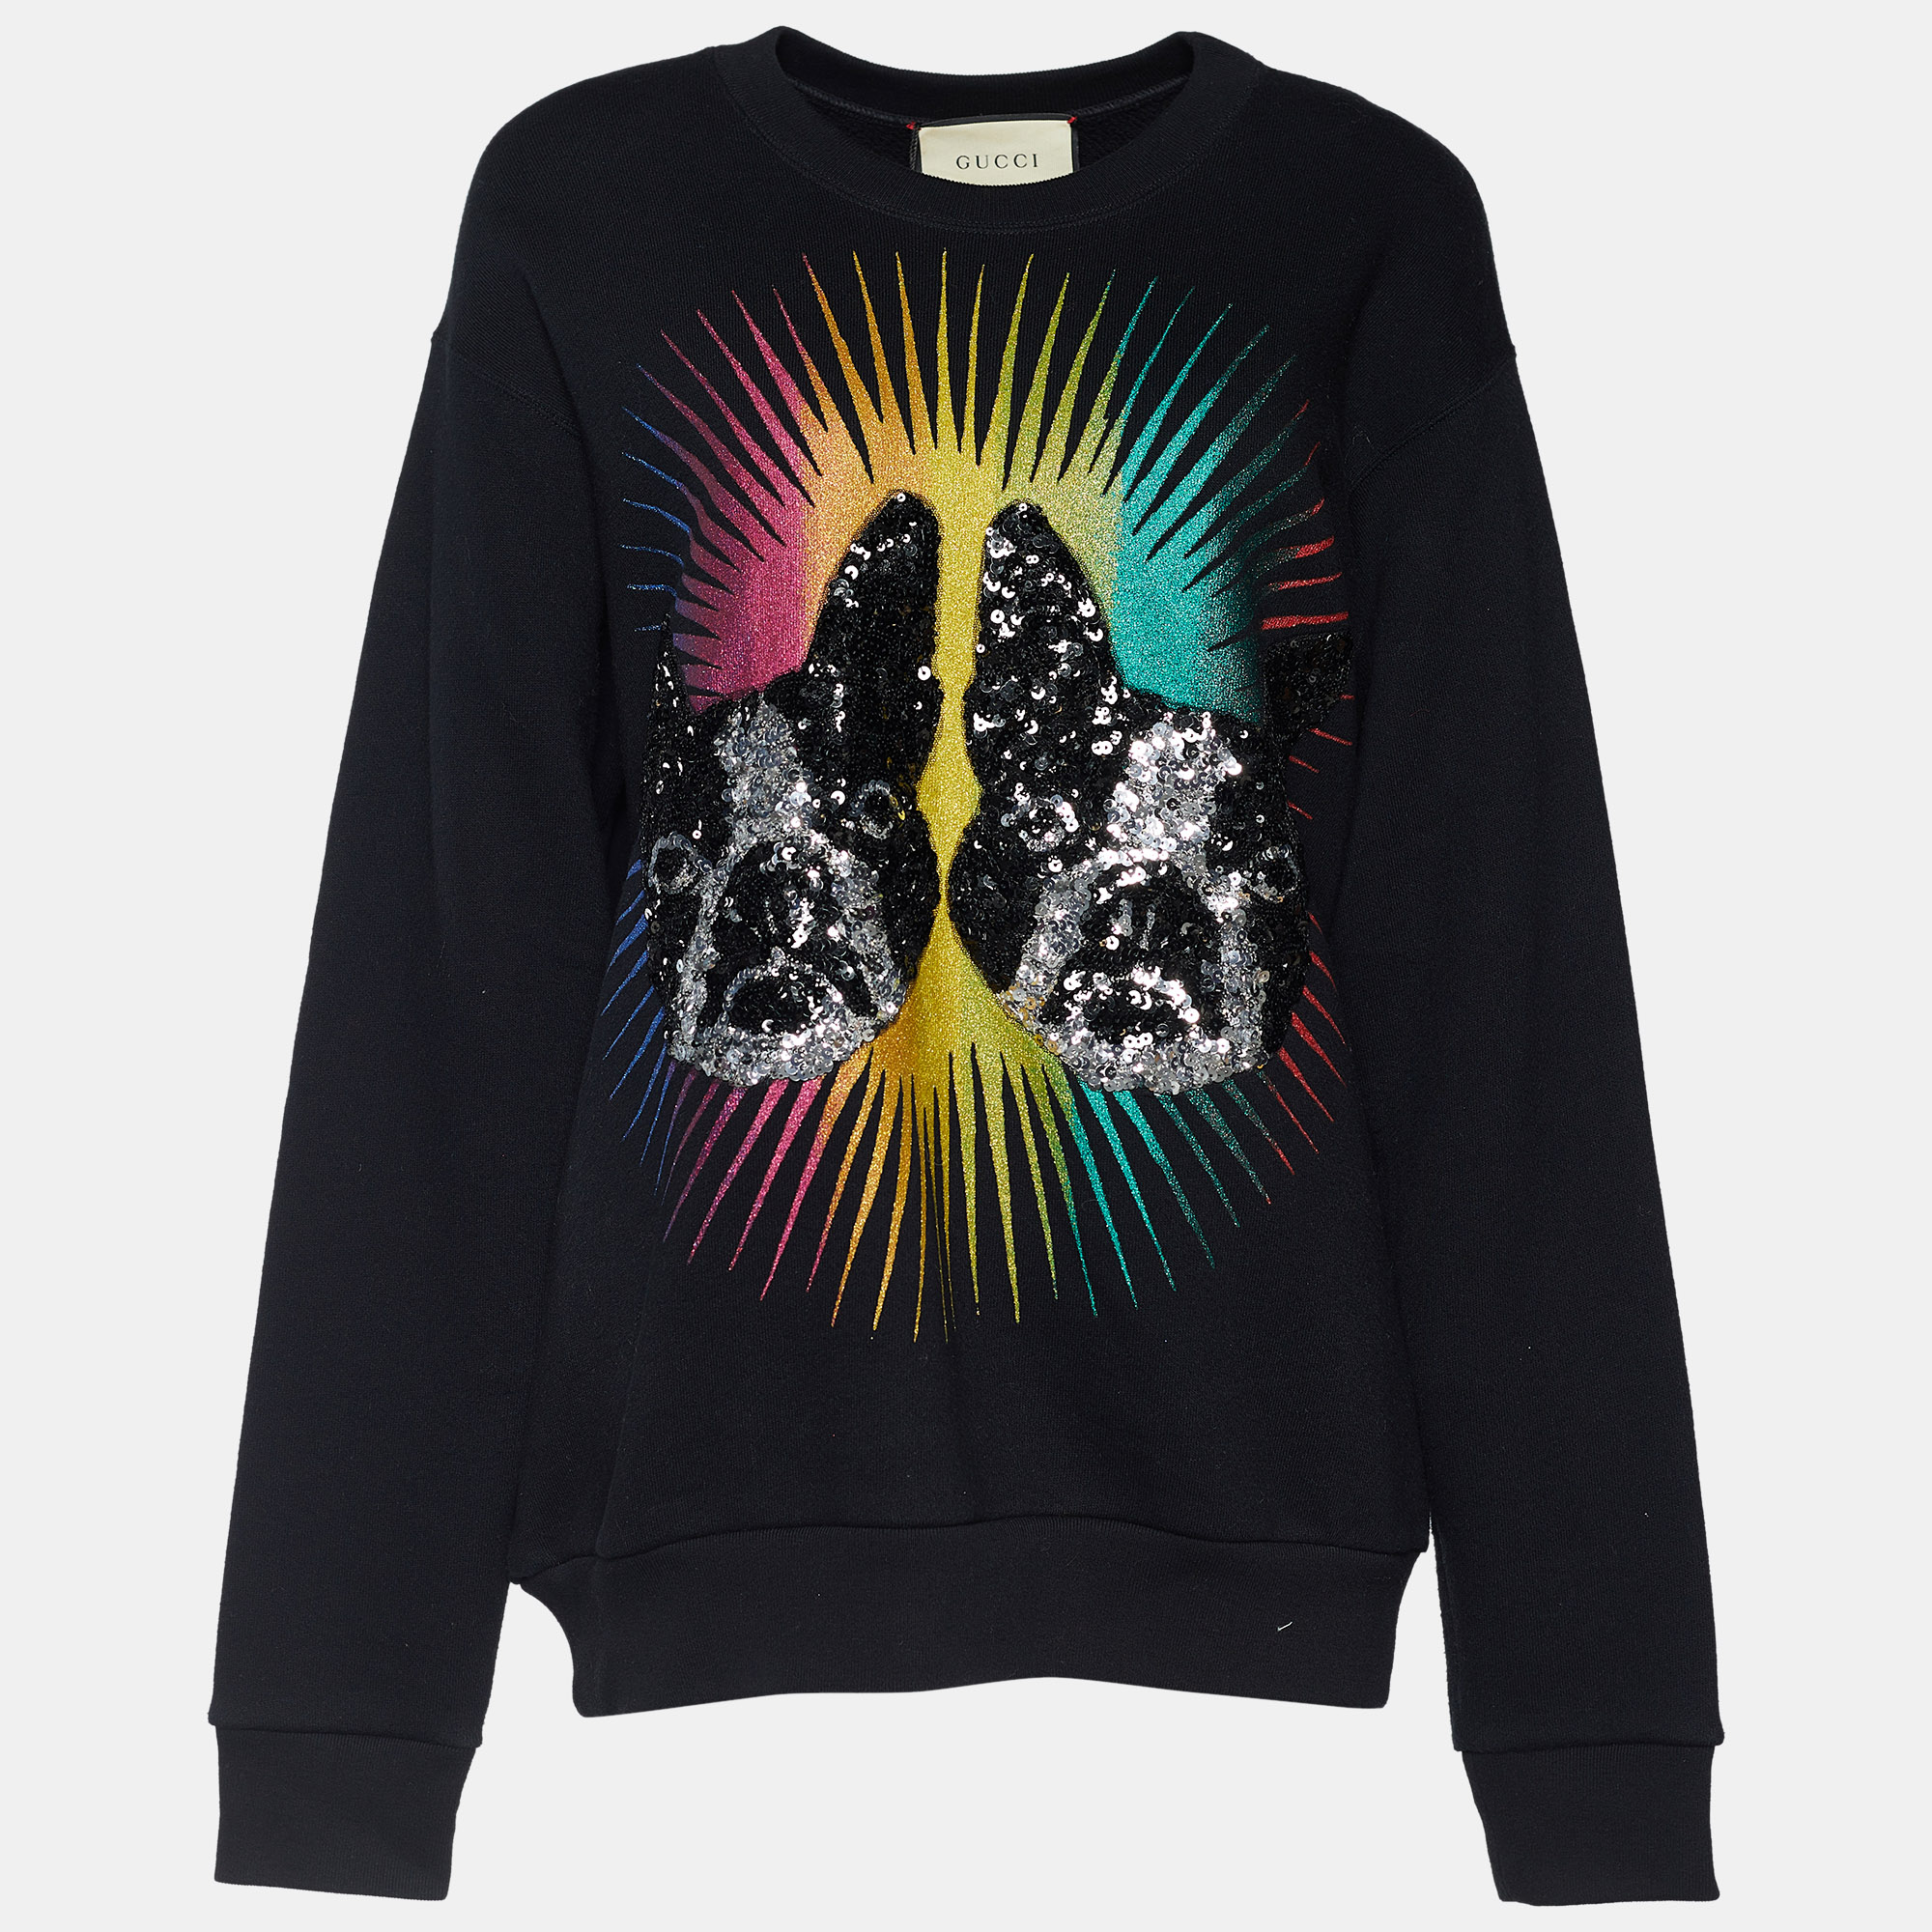 Pre-owned Gucci Black Knit Sequined Bosco & Orso Sweatshirt S